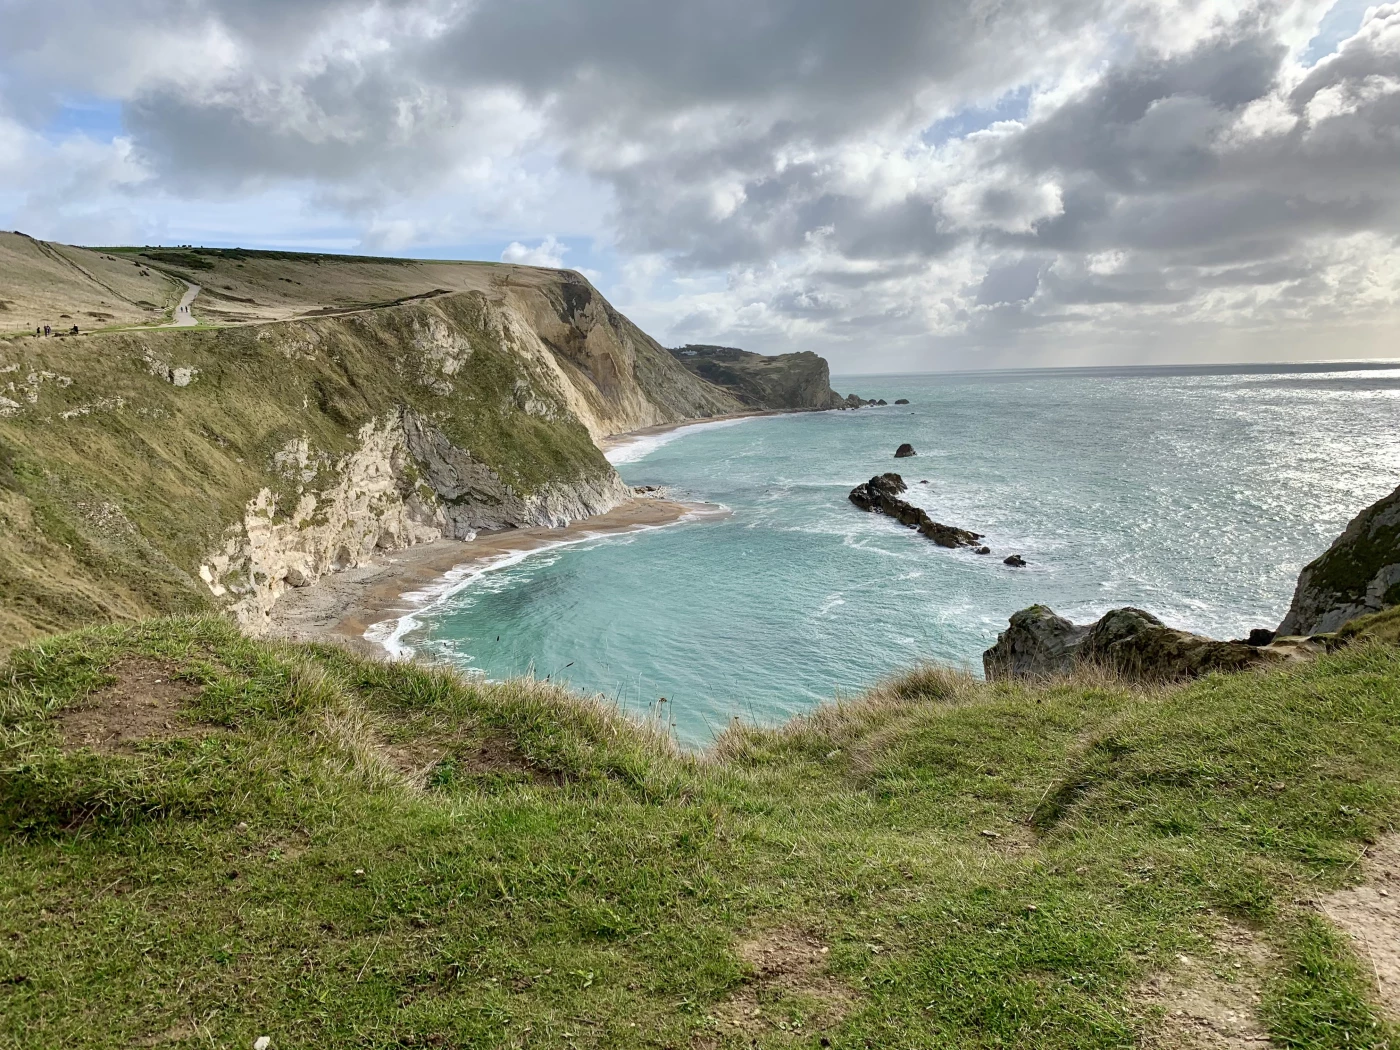 The Jurassic Coast is a World Heritage site on the southern coast of England. It has many beautiful...